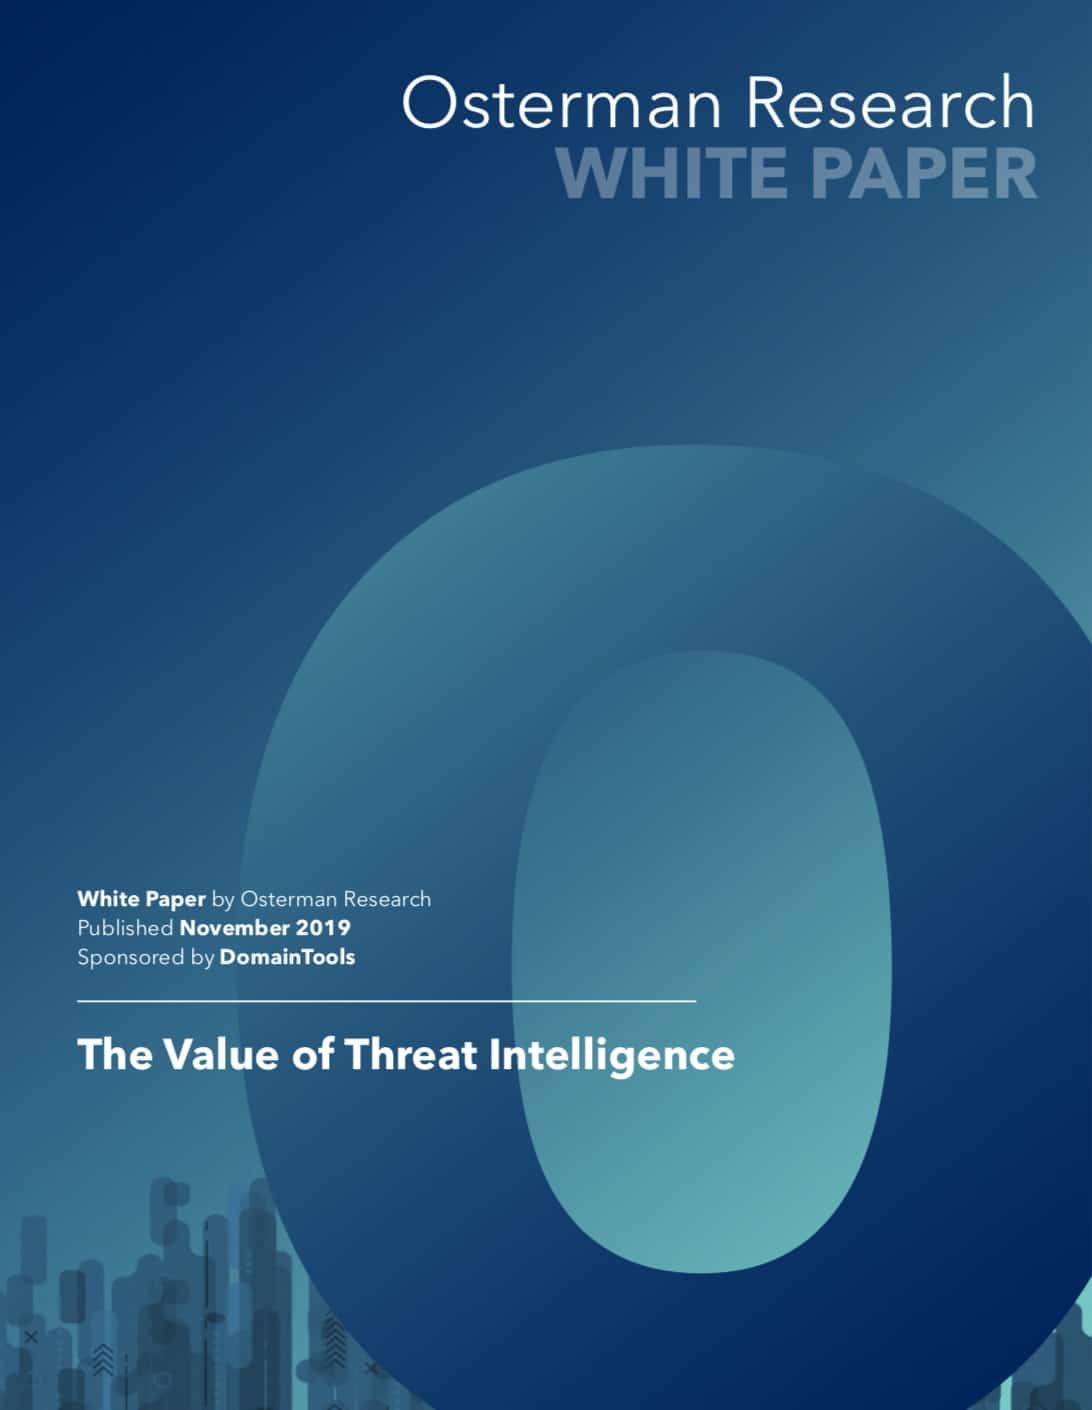 The Value of Threat Intelligence White Paper written by Osterman Research